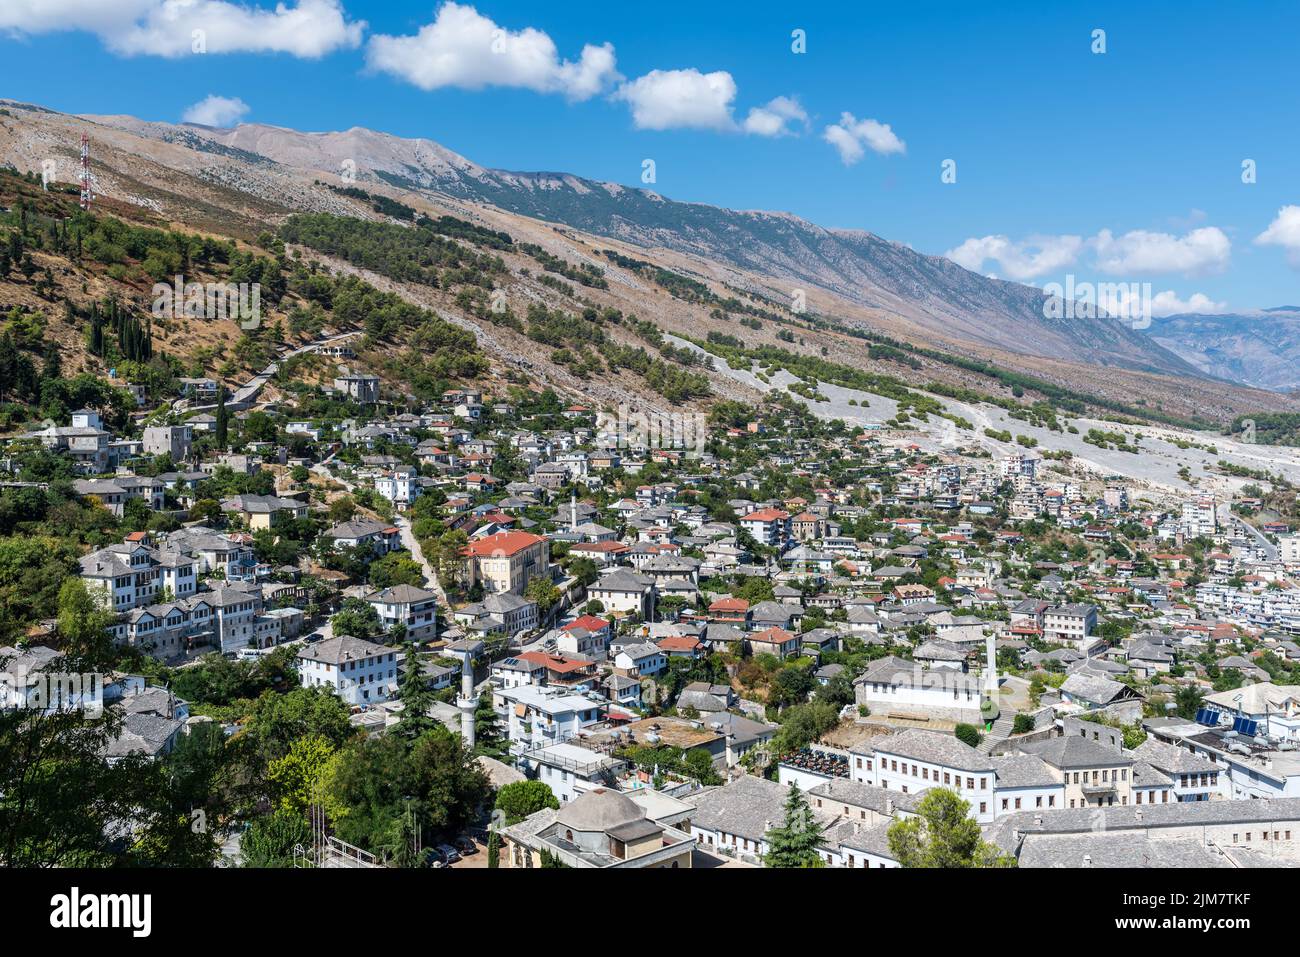 Aerial view of the old town of Gjirokaster, Albania Stock Photo